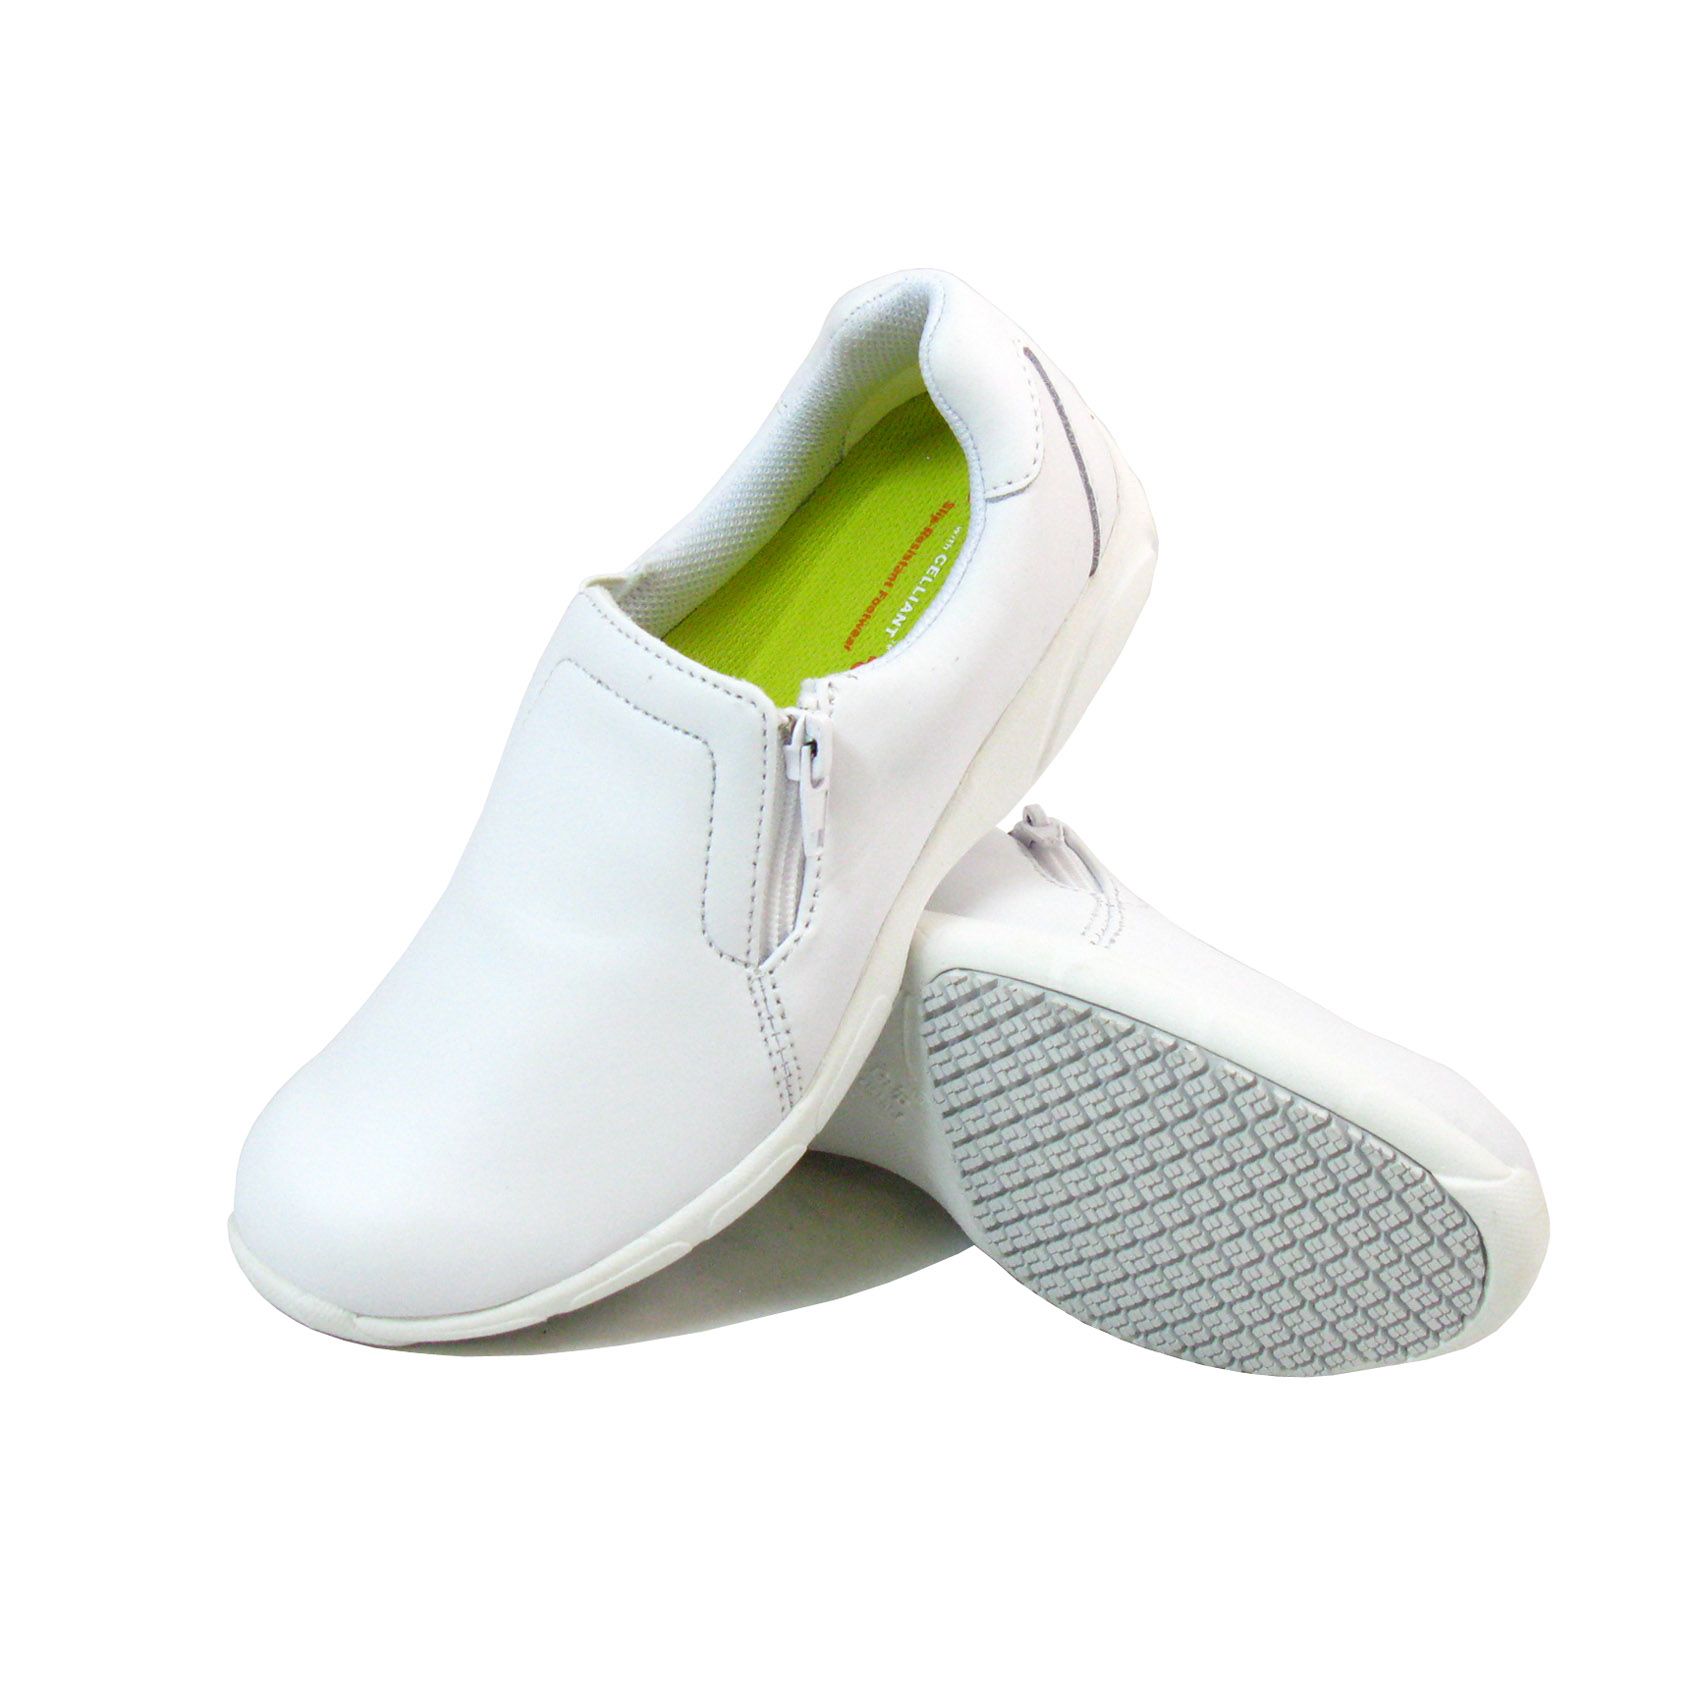 Genuine Grip Women Slip-Resistant Slip-on Casual Shoes #315 White Leather